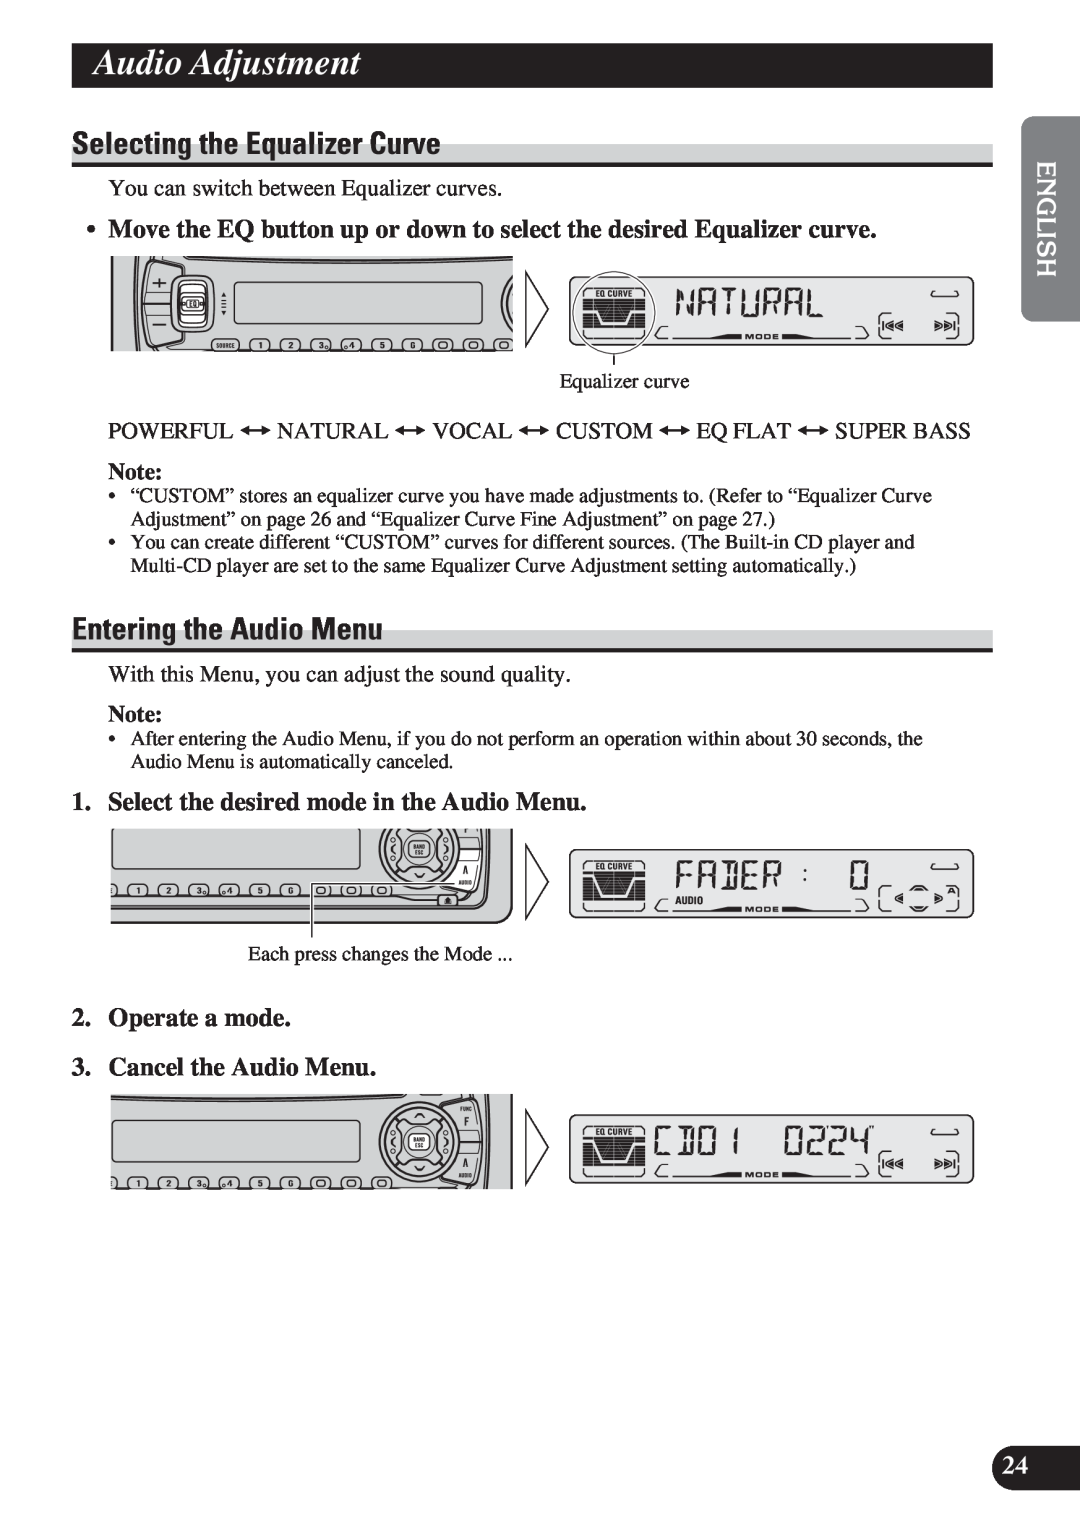 Pioneer DEH-P3150 operation manual Audio Adjustment, Selecting the Equalizer Curve, Entering the Audio Menu 